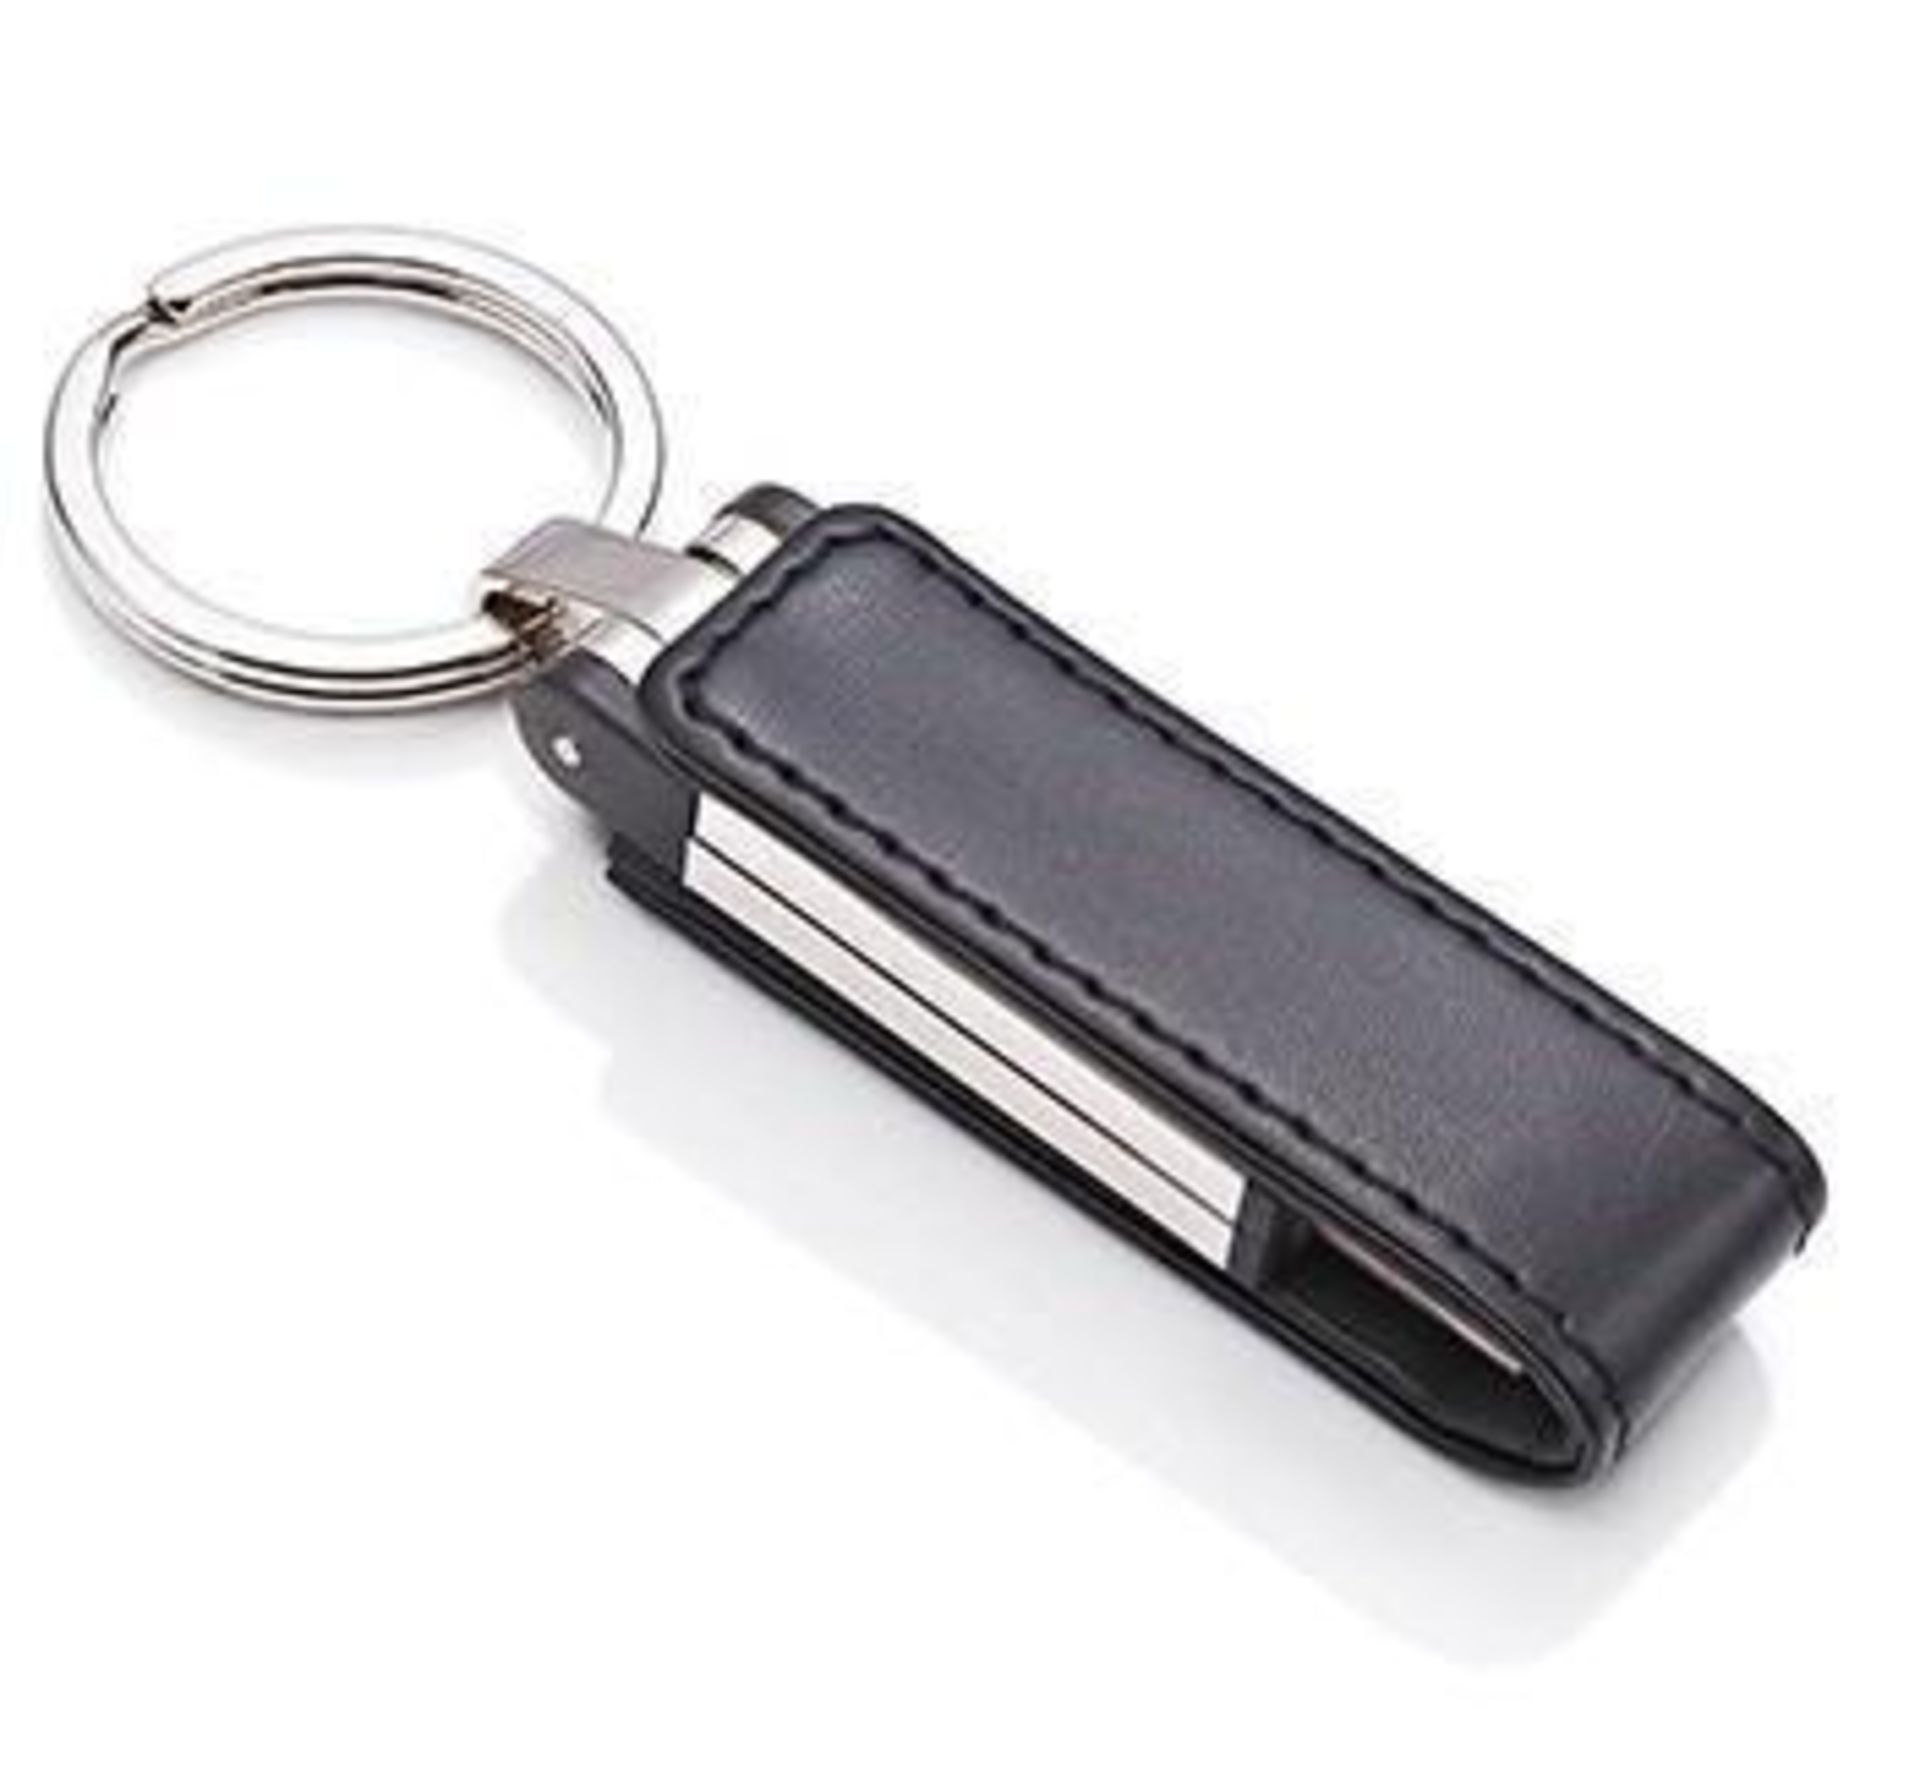 1 x ICE London Silver Plated 2GB USB Flashdrive Keyring - Features A Genuine Leather Wrap With Magne